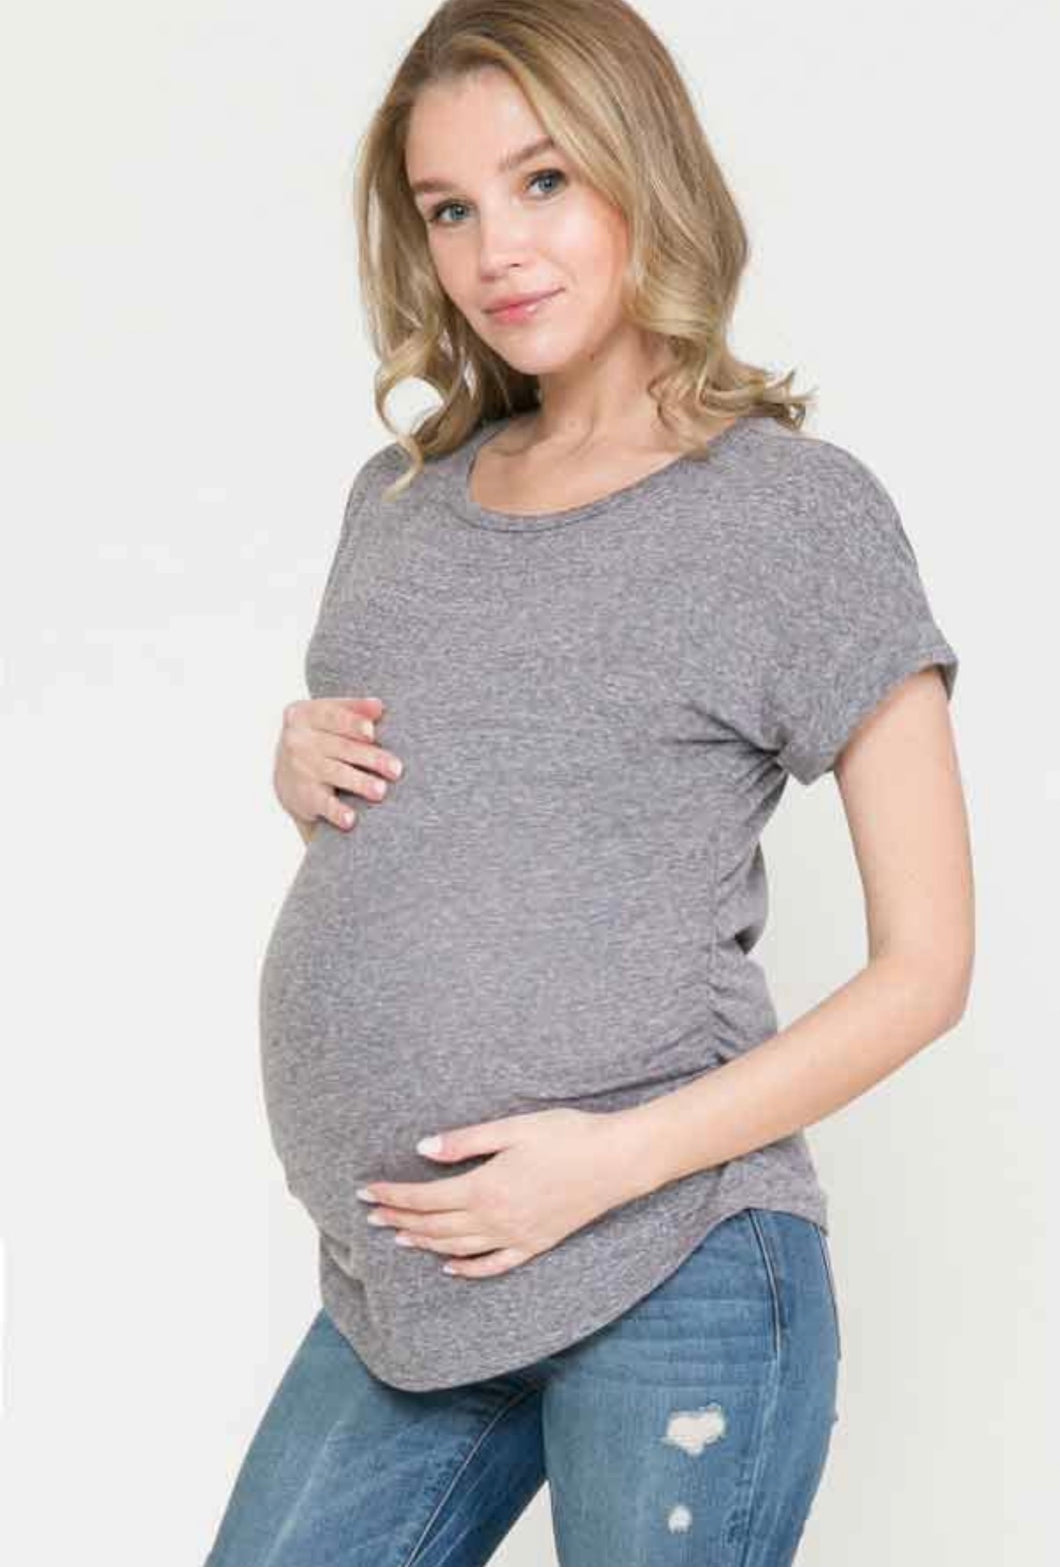 Charcoal Maternity Top